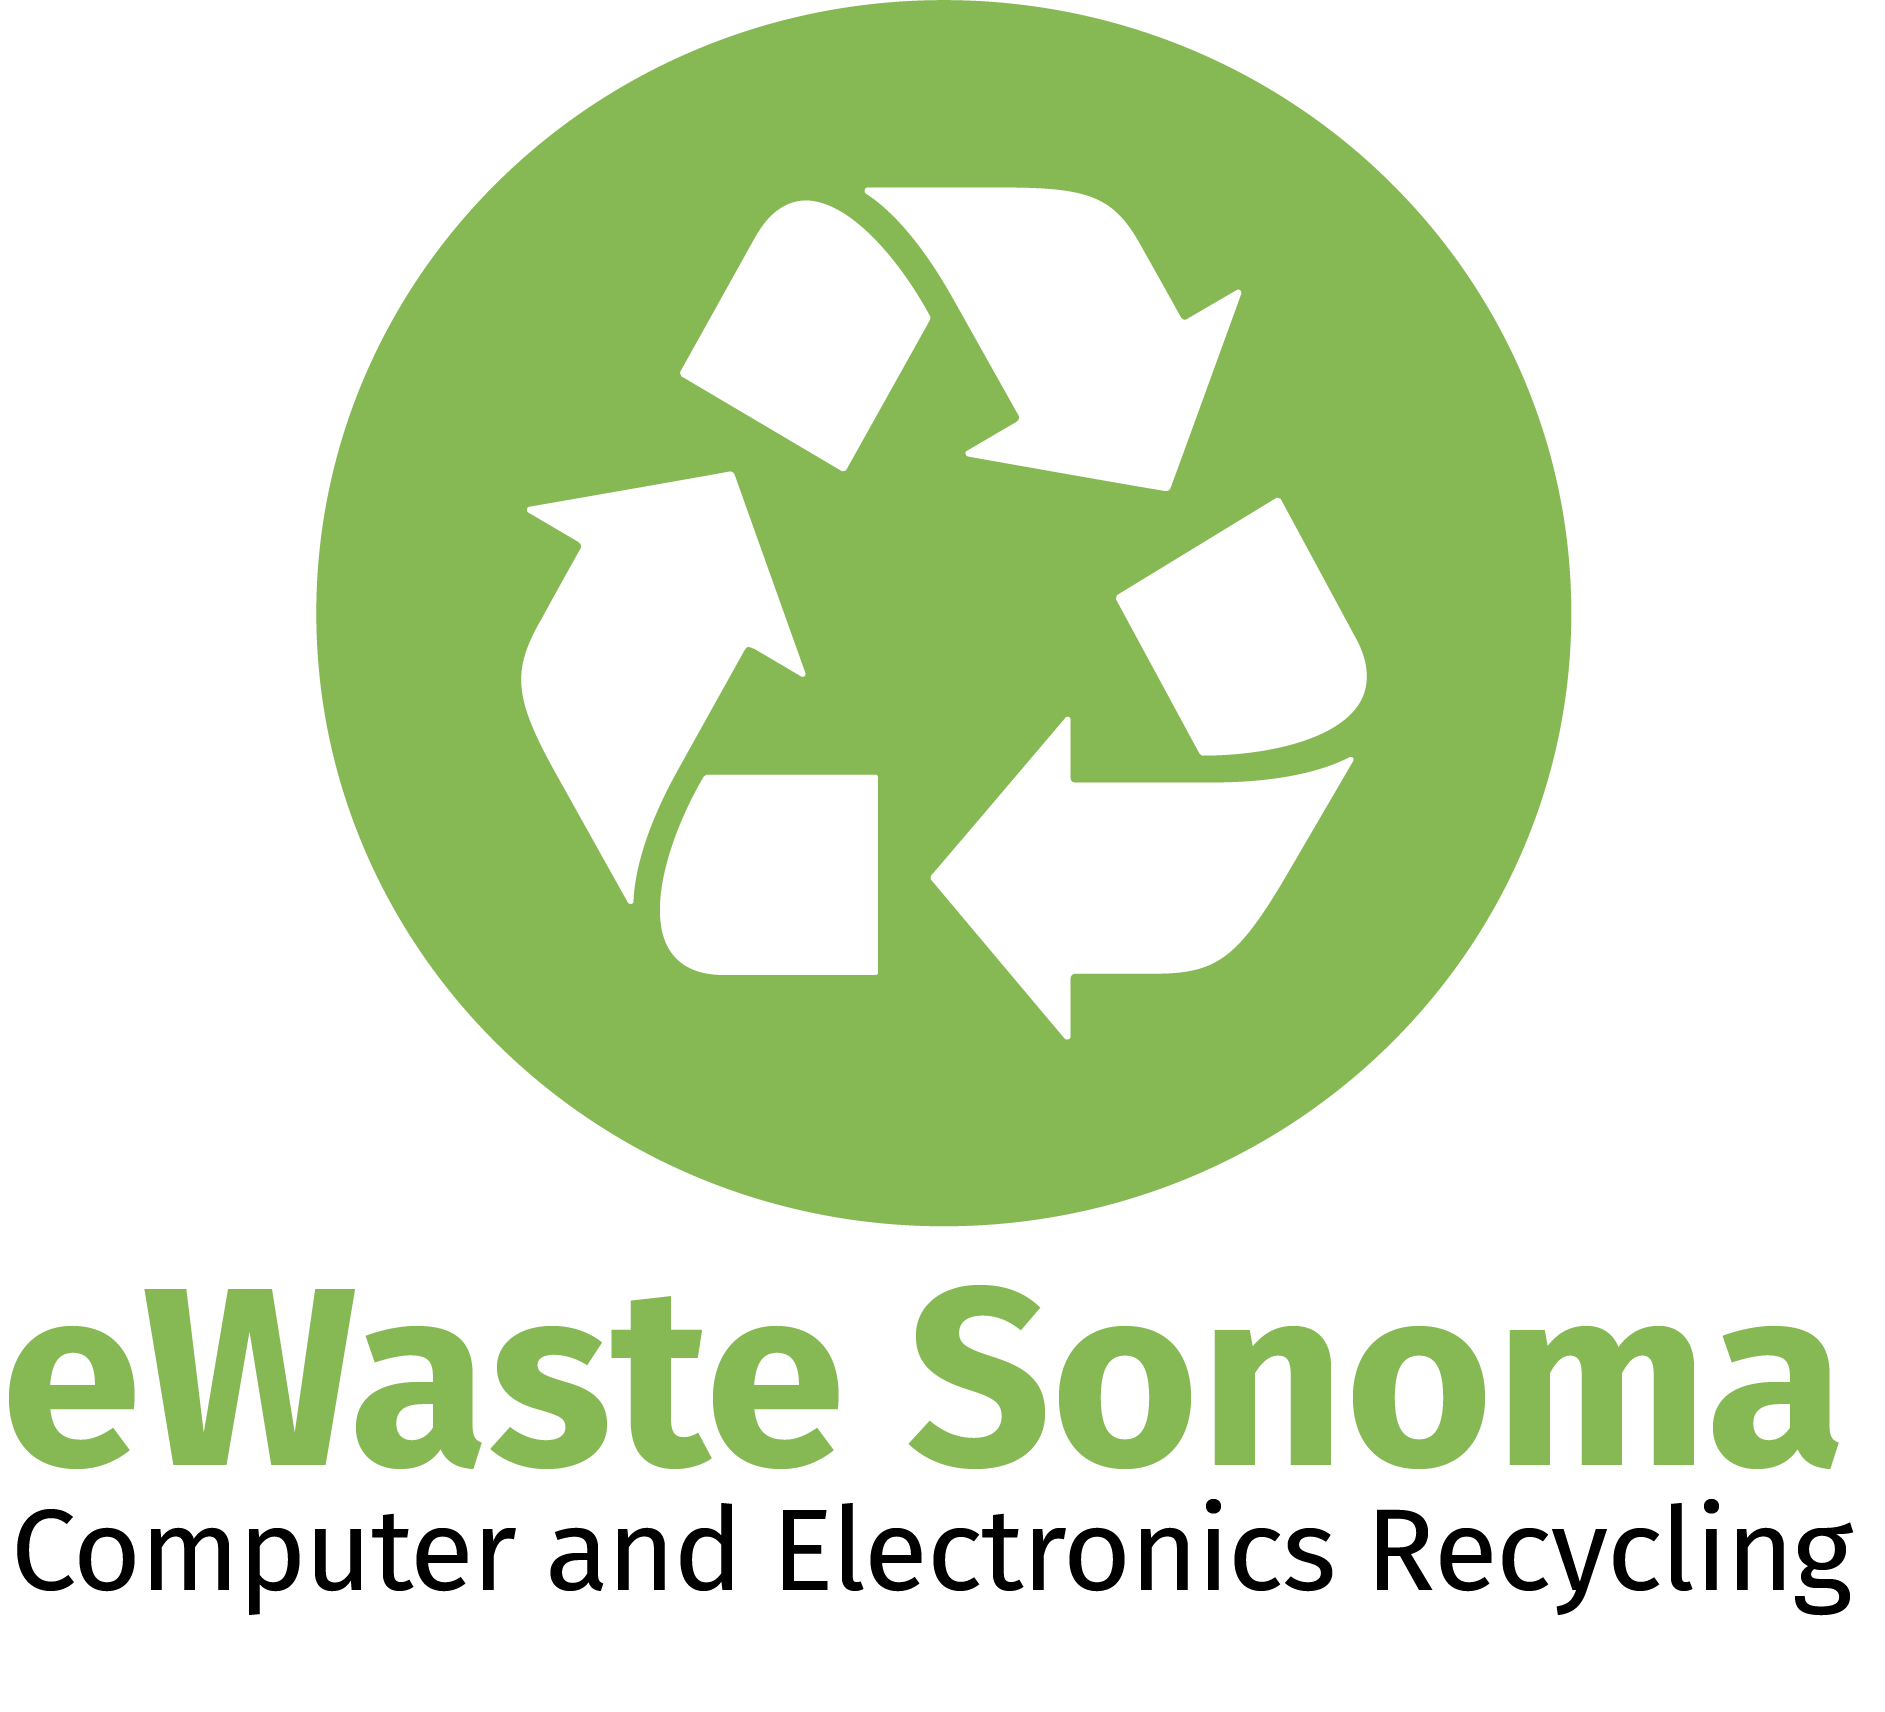 eWaste Sonoma: Computer and Electronics Recycling